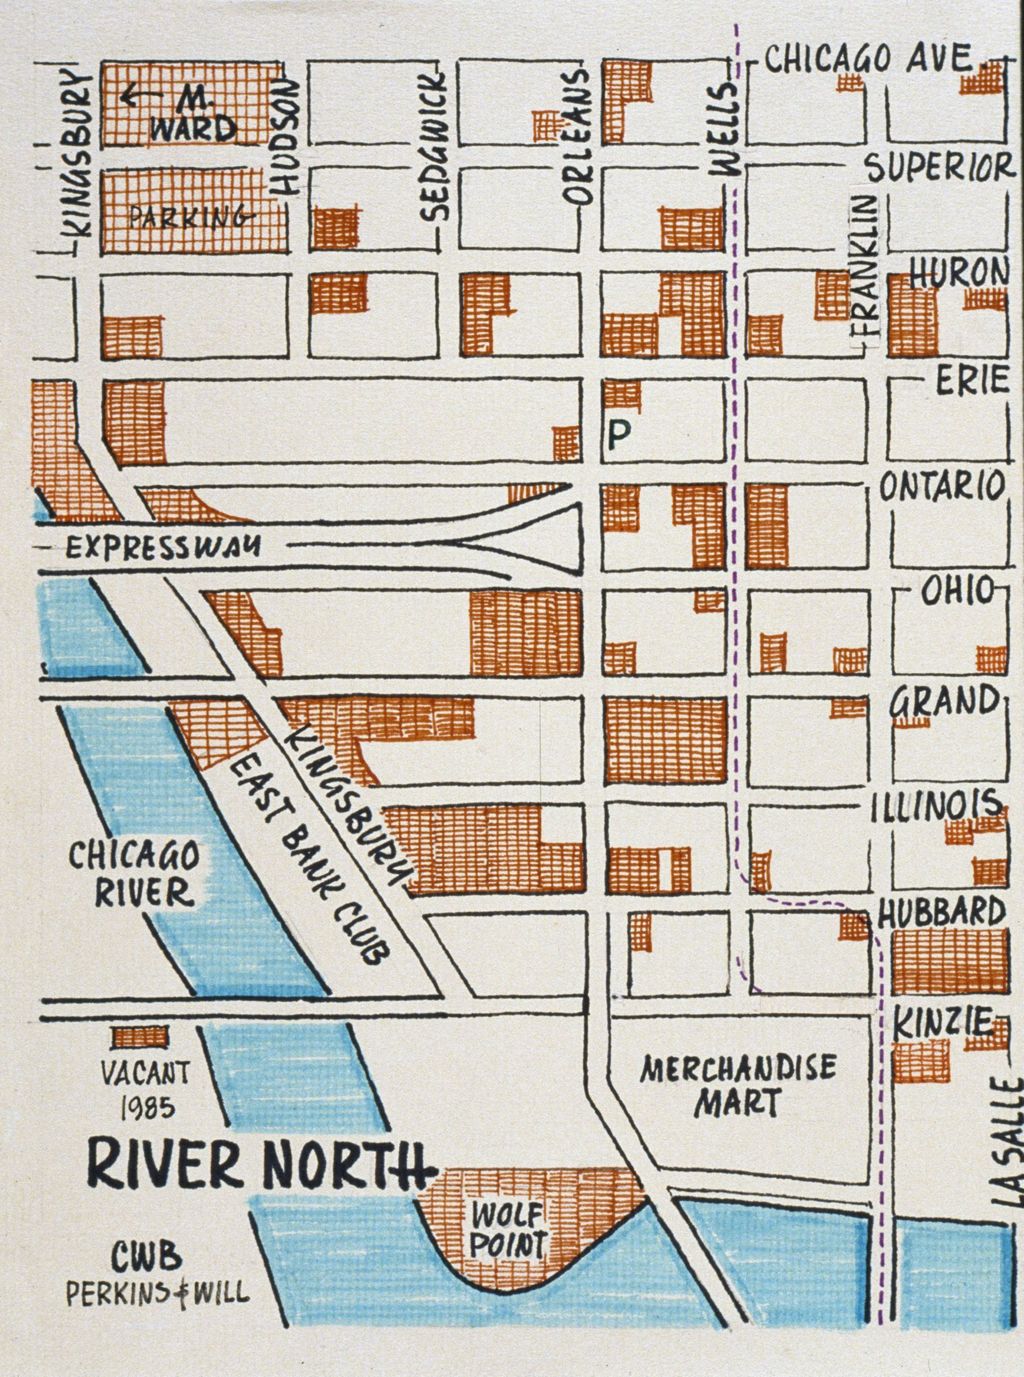 Vacant land in River North, 1985